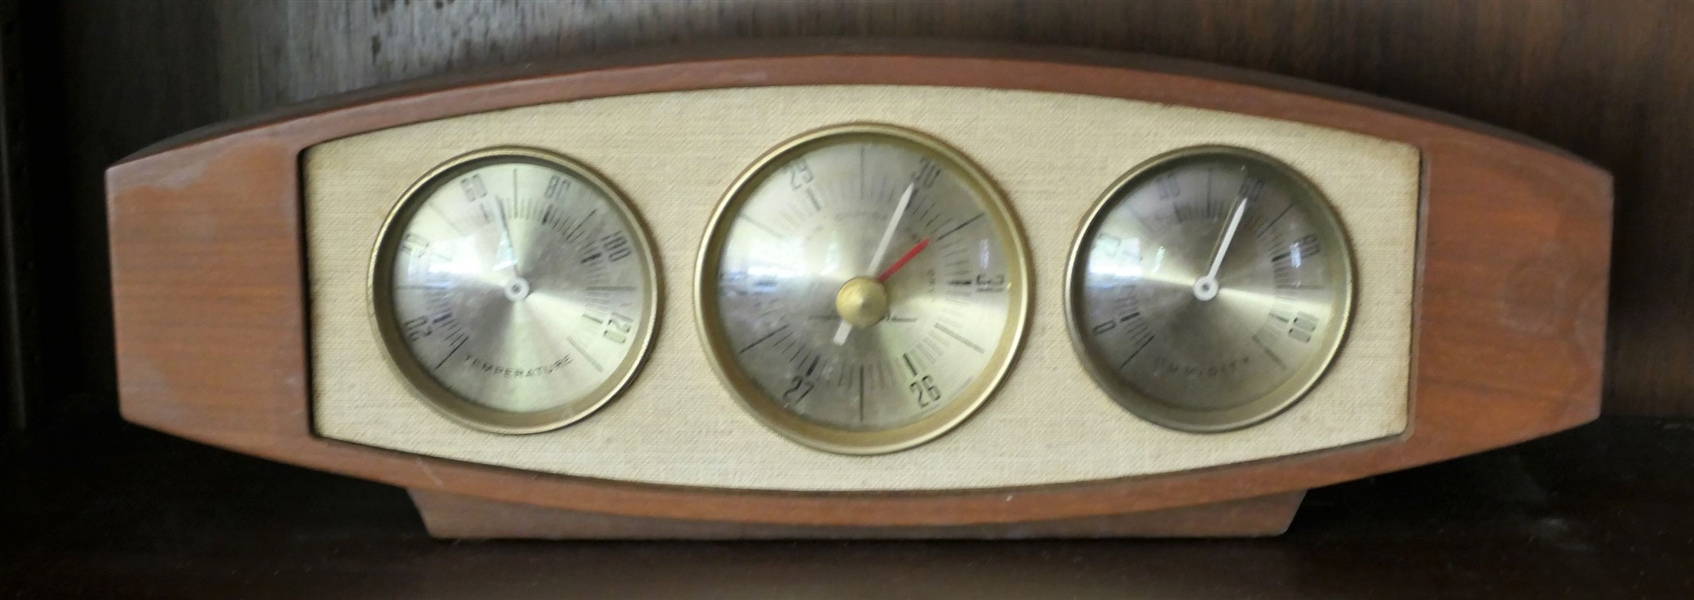 Mid Century Airguide Barometer - Temp, Weather, and Humidify - Measures 4 1/2" by 13"